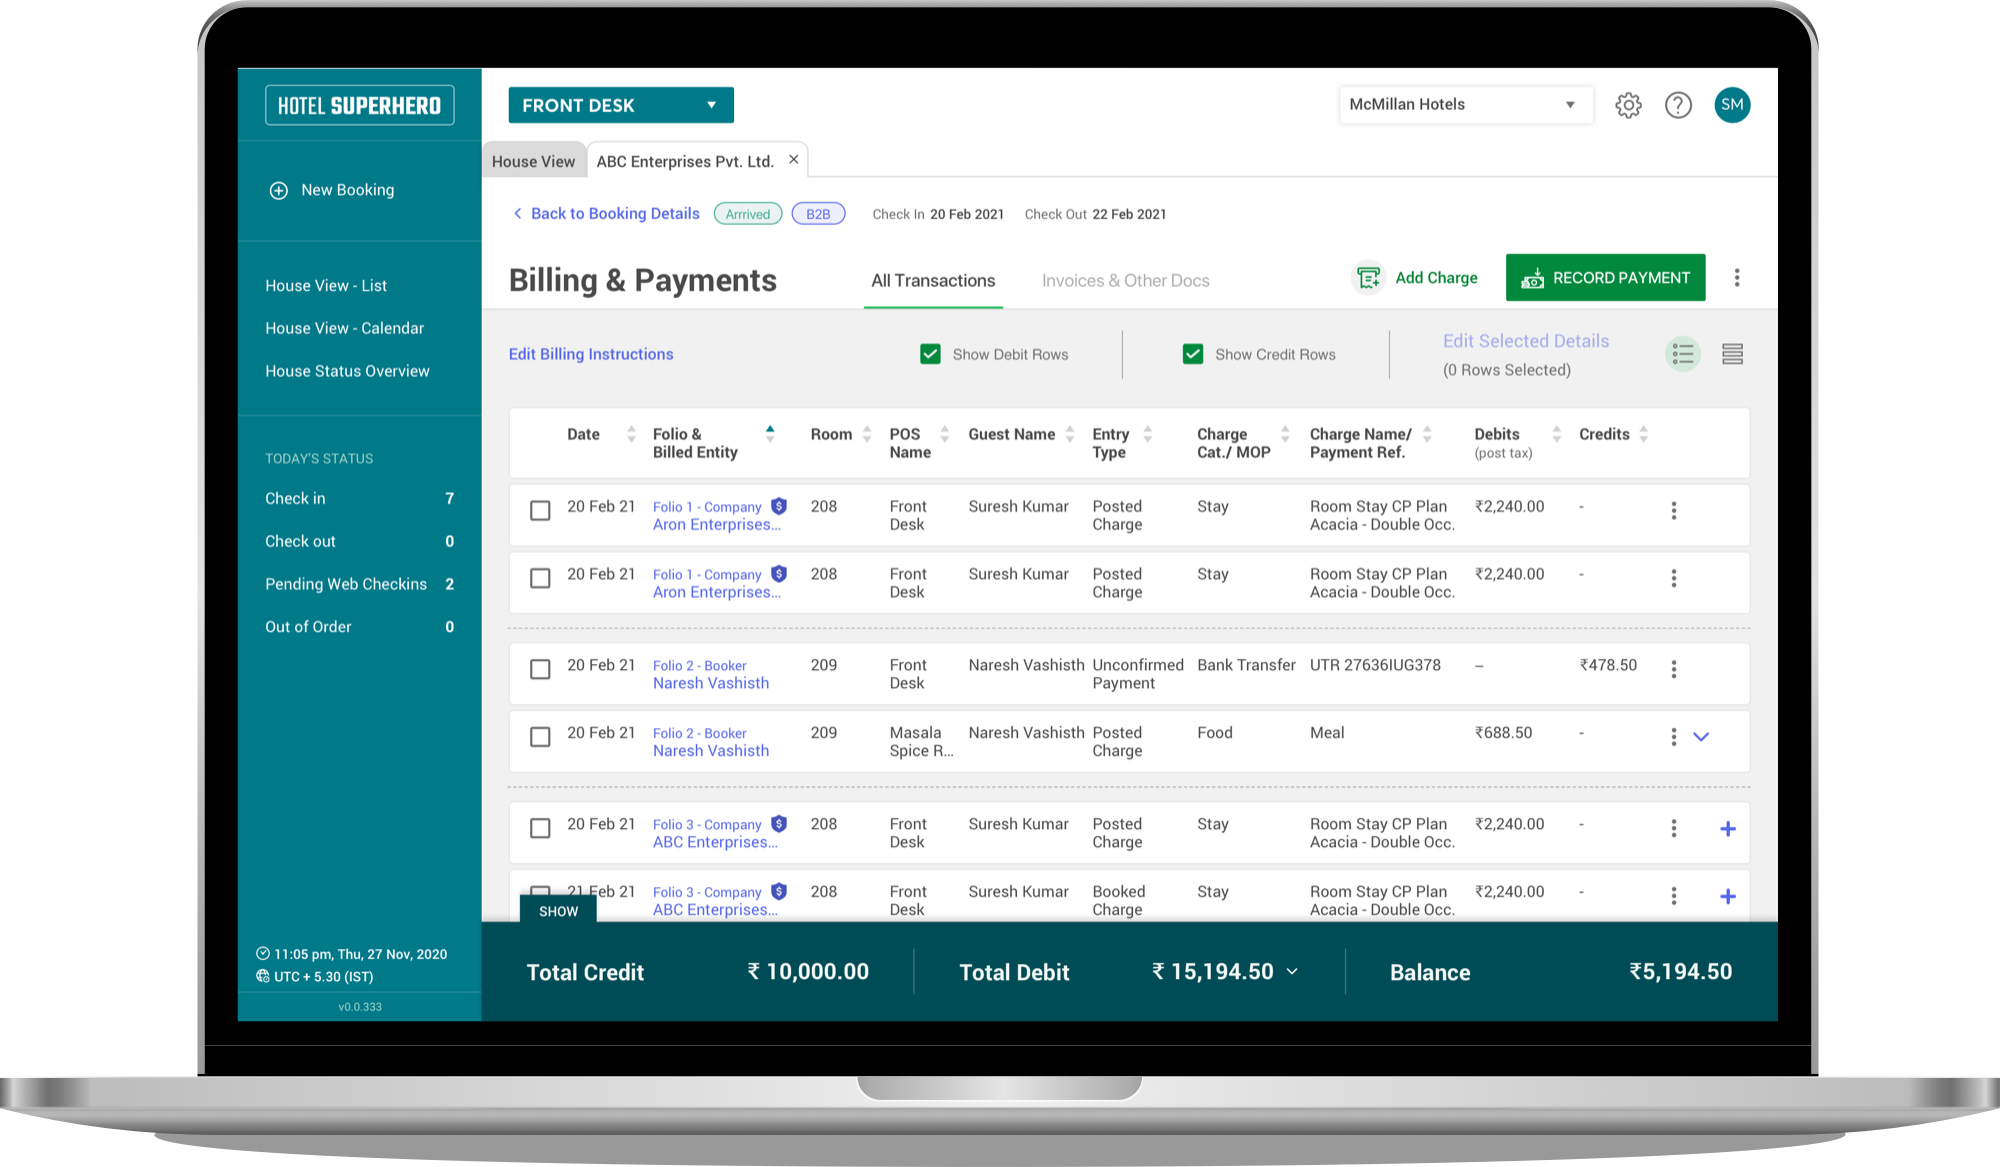 Billing & Payments Page